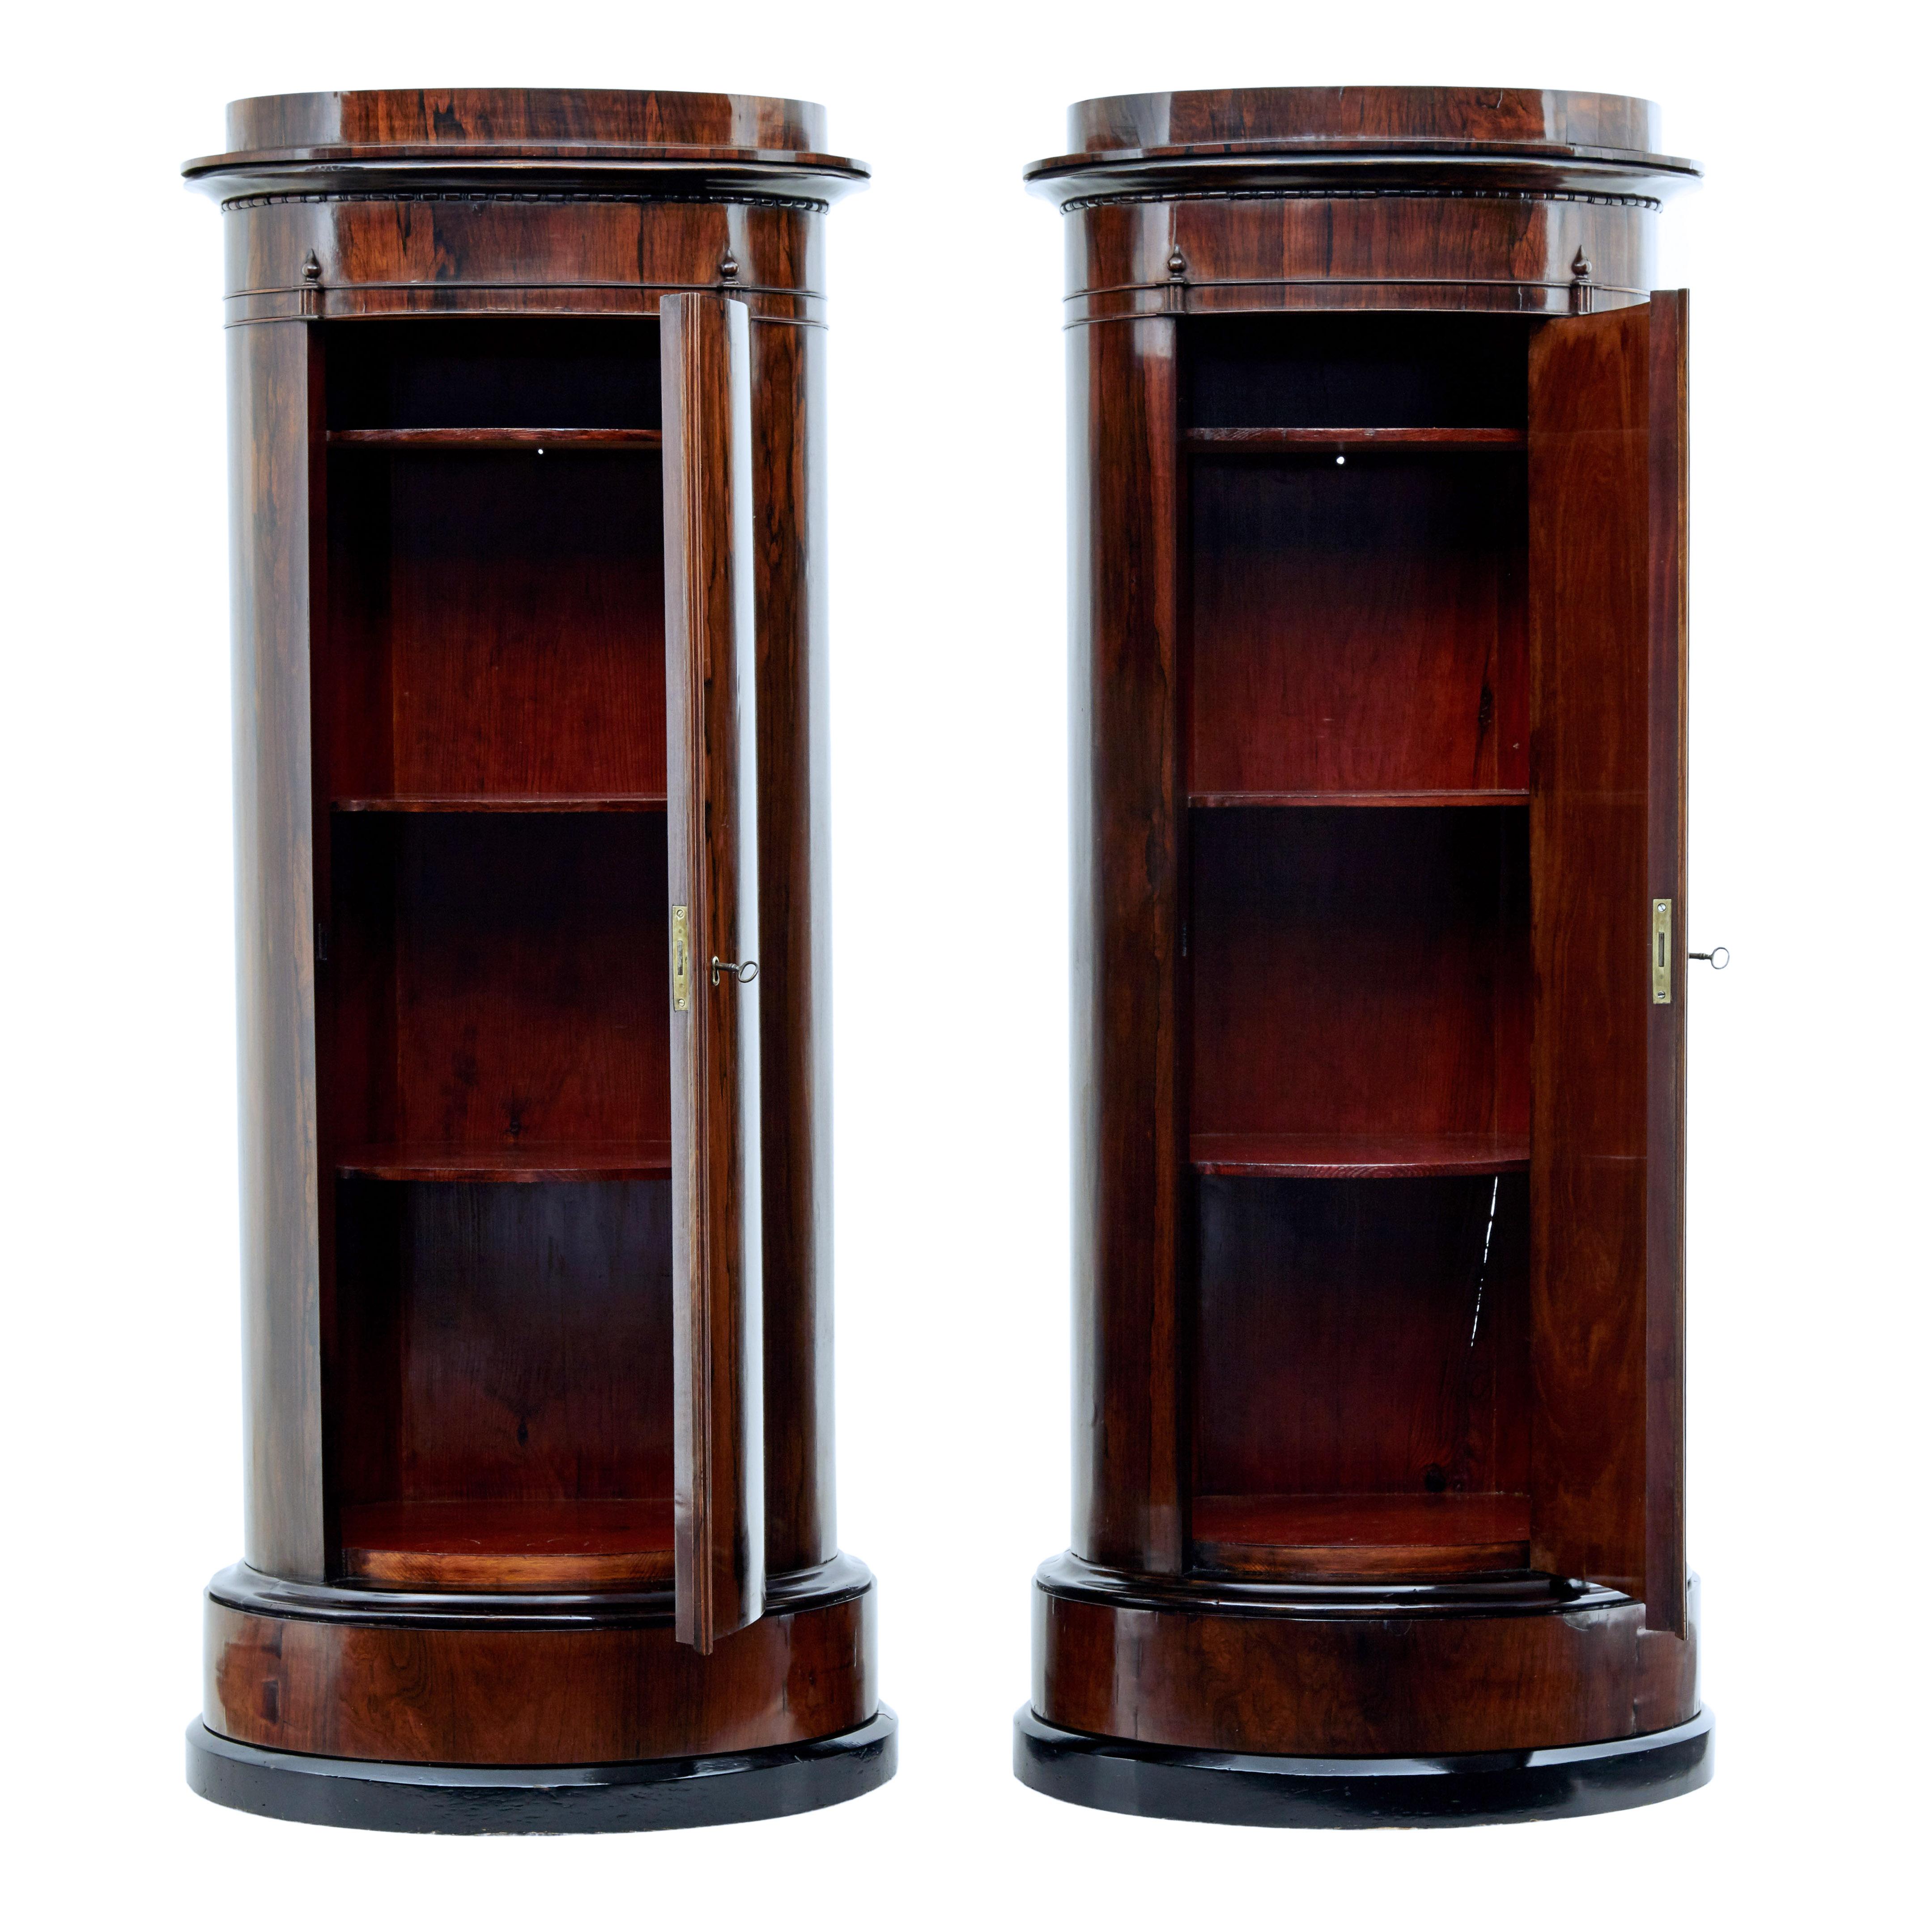 Stunning pair of palisander cabinets, circa 1860.

Rare to be still found in a pair. These pieces act as a cabinet and a pedestal for displaying busts or floral arrangements.

Single door opens to 3 fixed shelves in a polished interior.